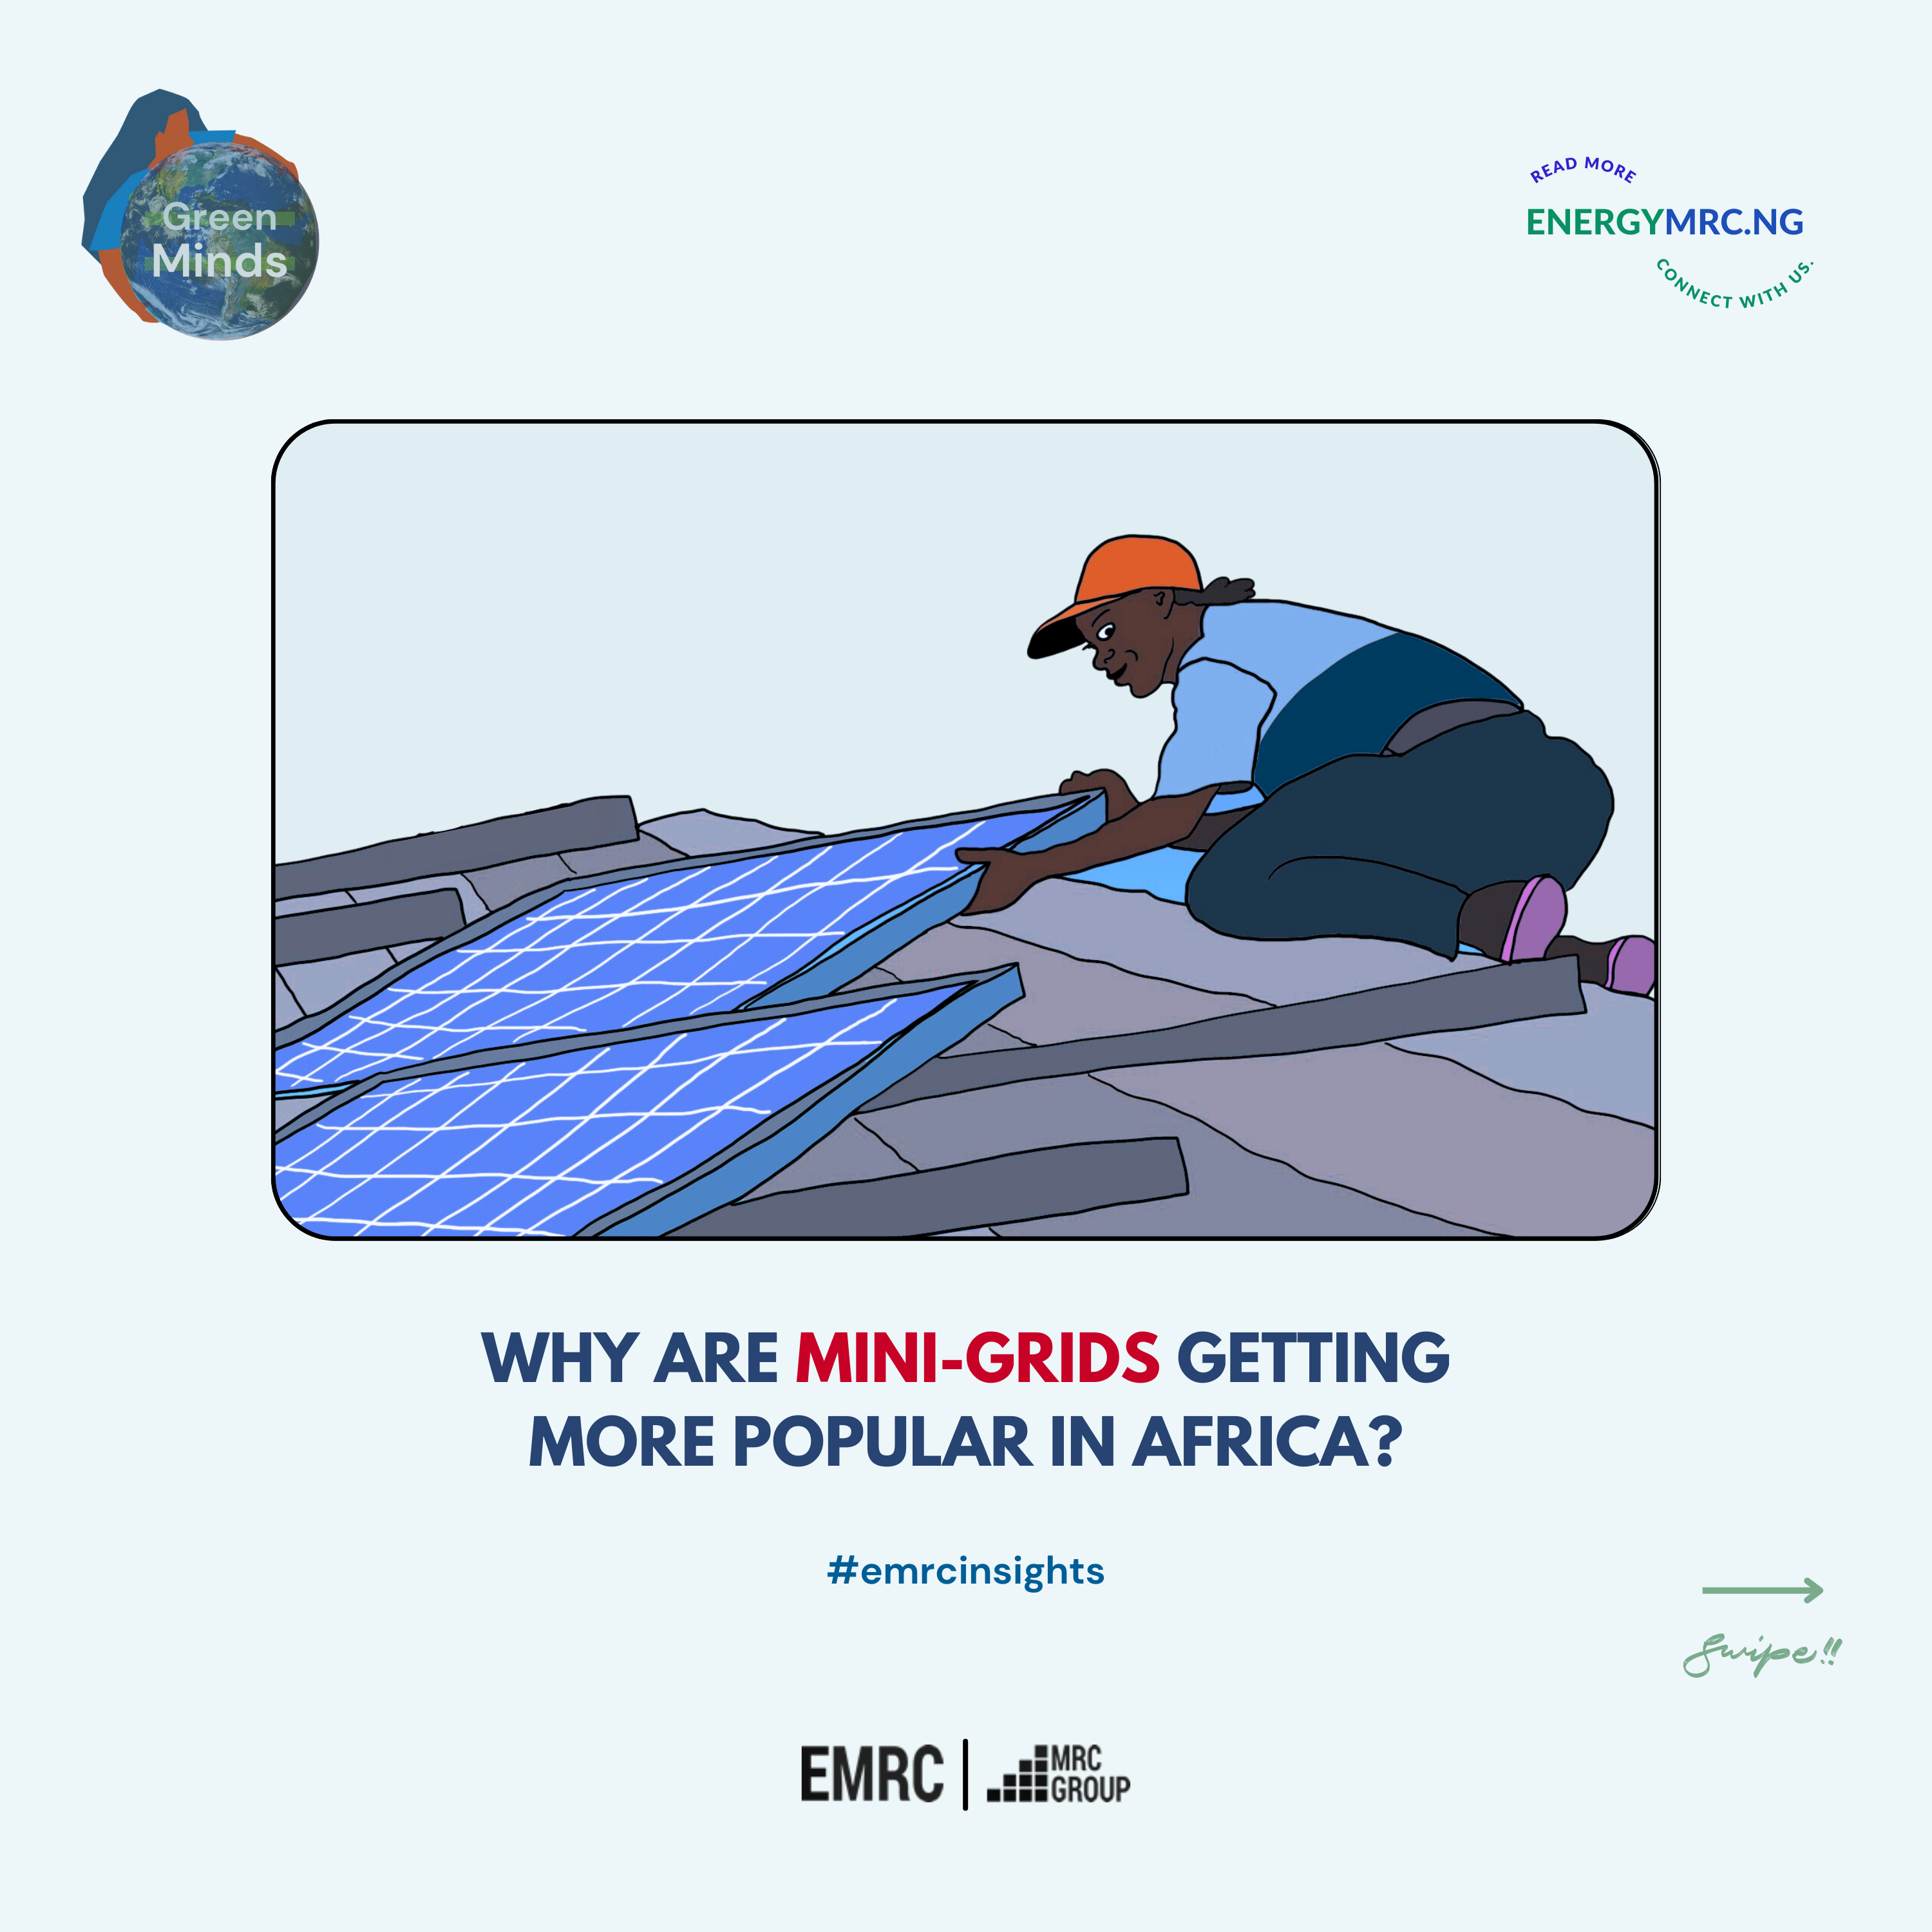 WHY ARE MINI-GRIDS GETTING MORE POPULAR IN AFRICA?